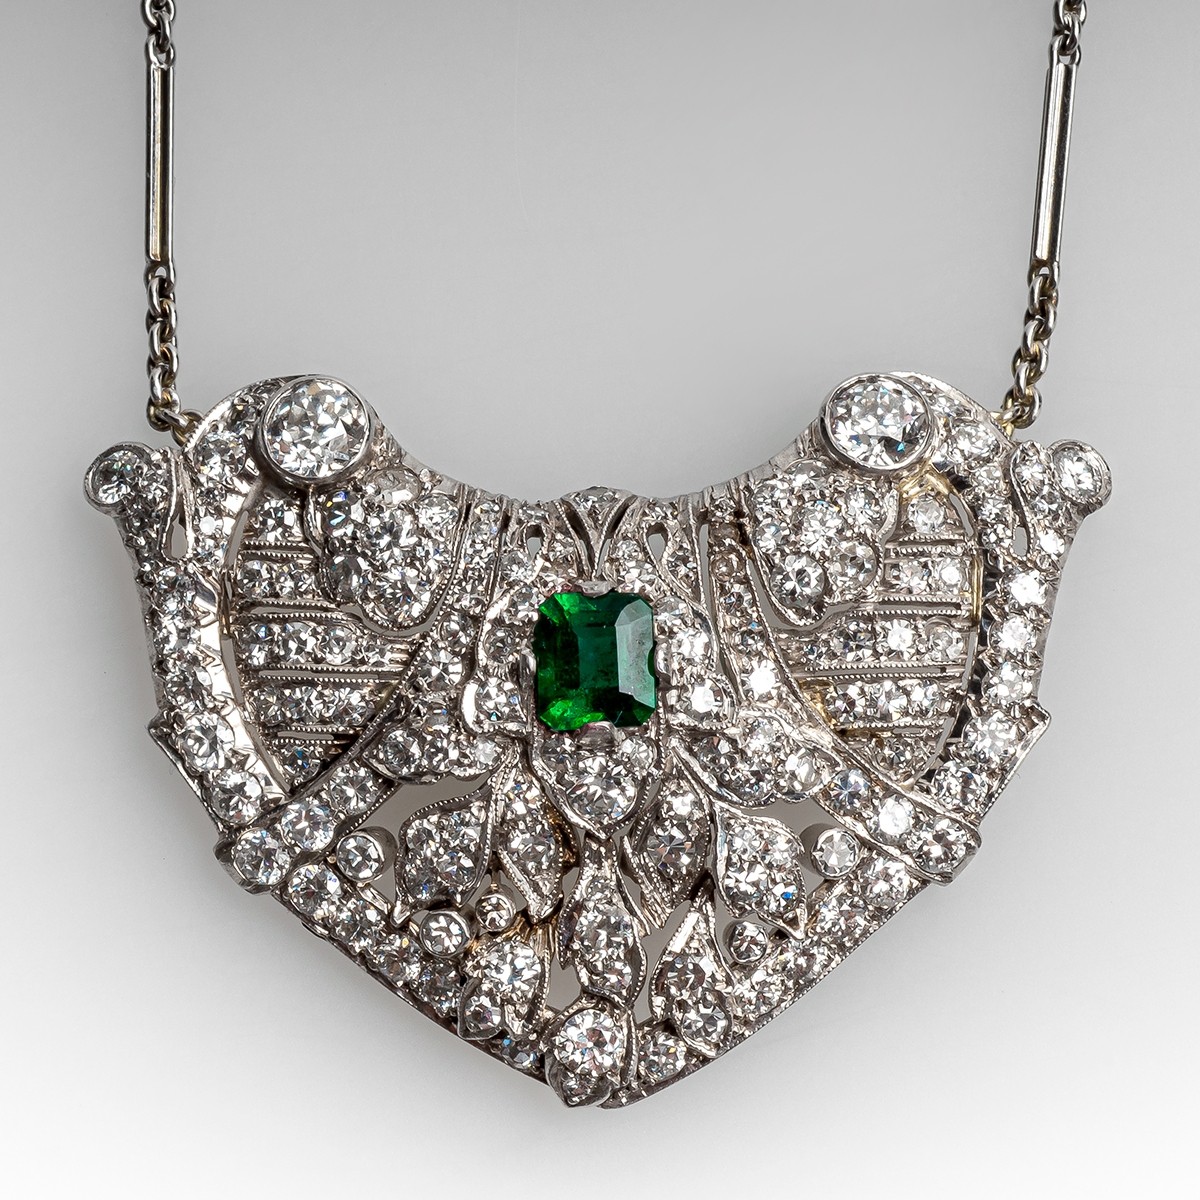 AN ART DECO DIAMOND AND EMERALD NECKLACE, CIRCA 1920S — Revival Jewels